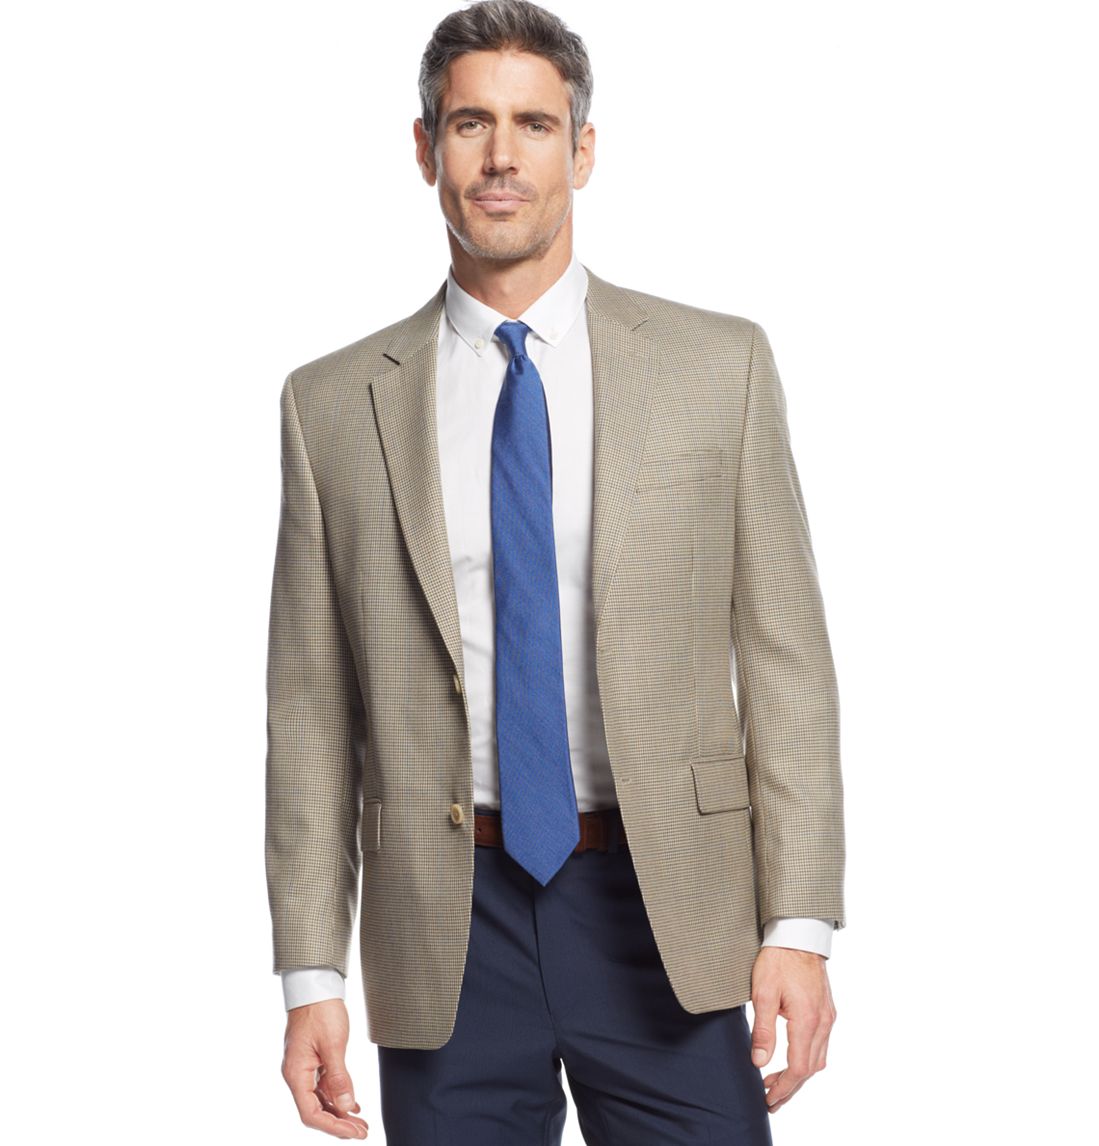 MALE MODELS IN SUITS: TREY GRILEY FOR MACY'S